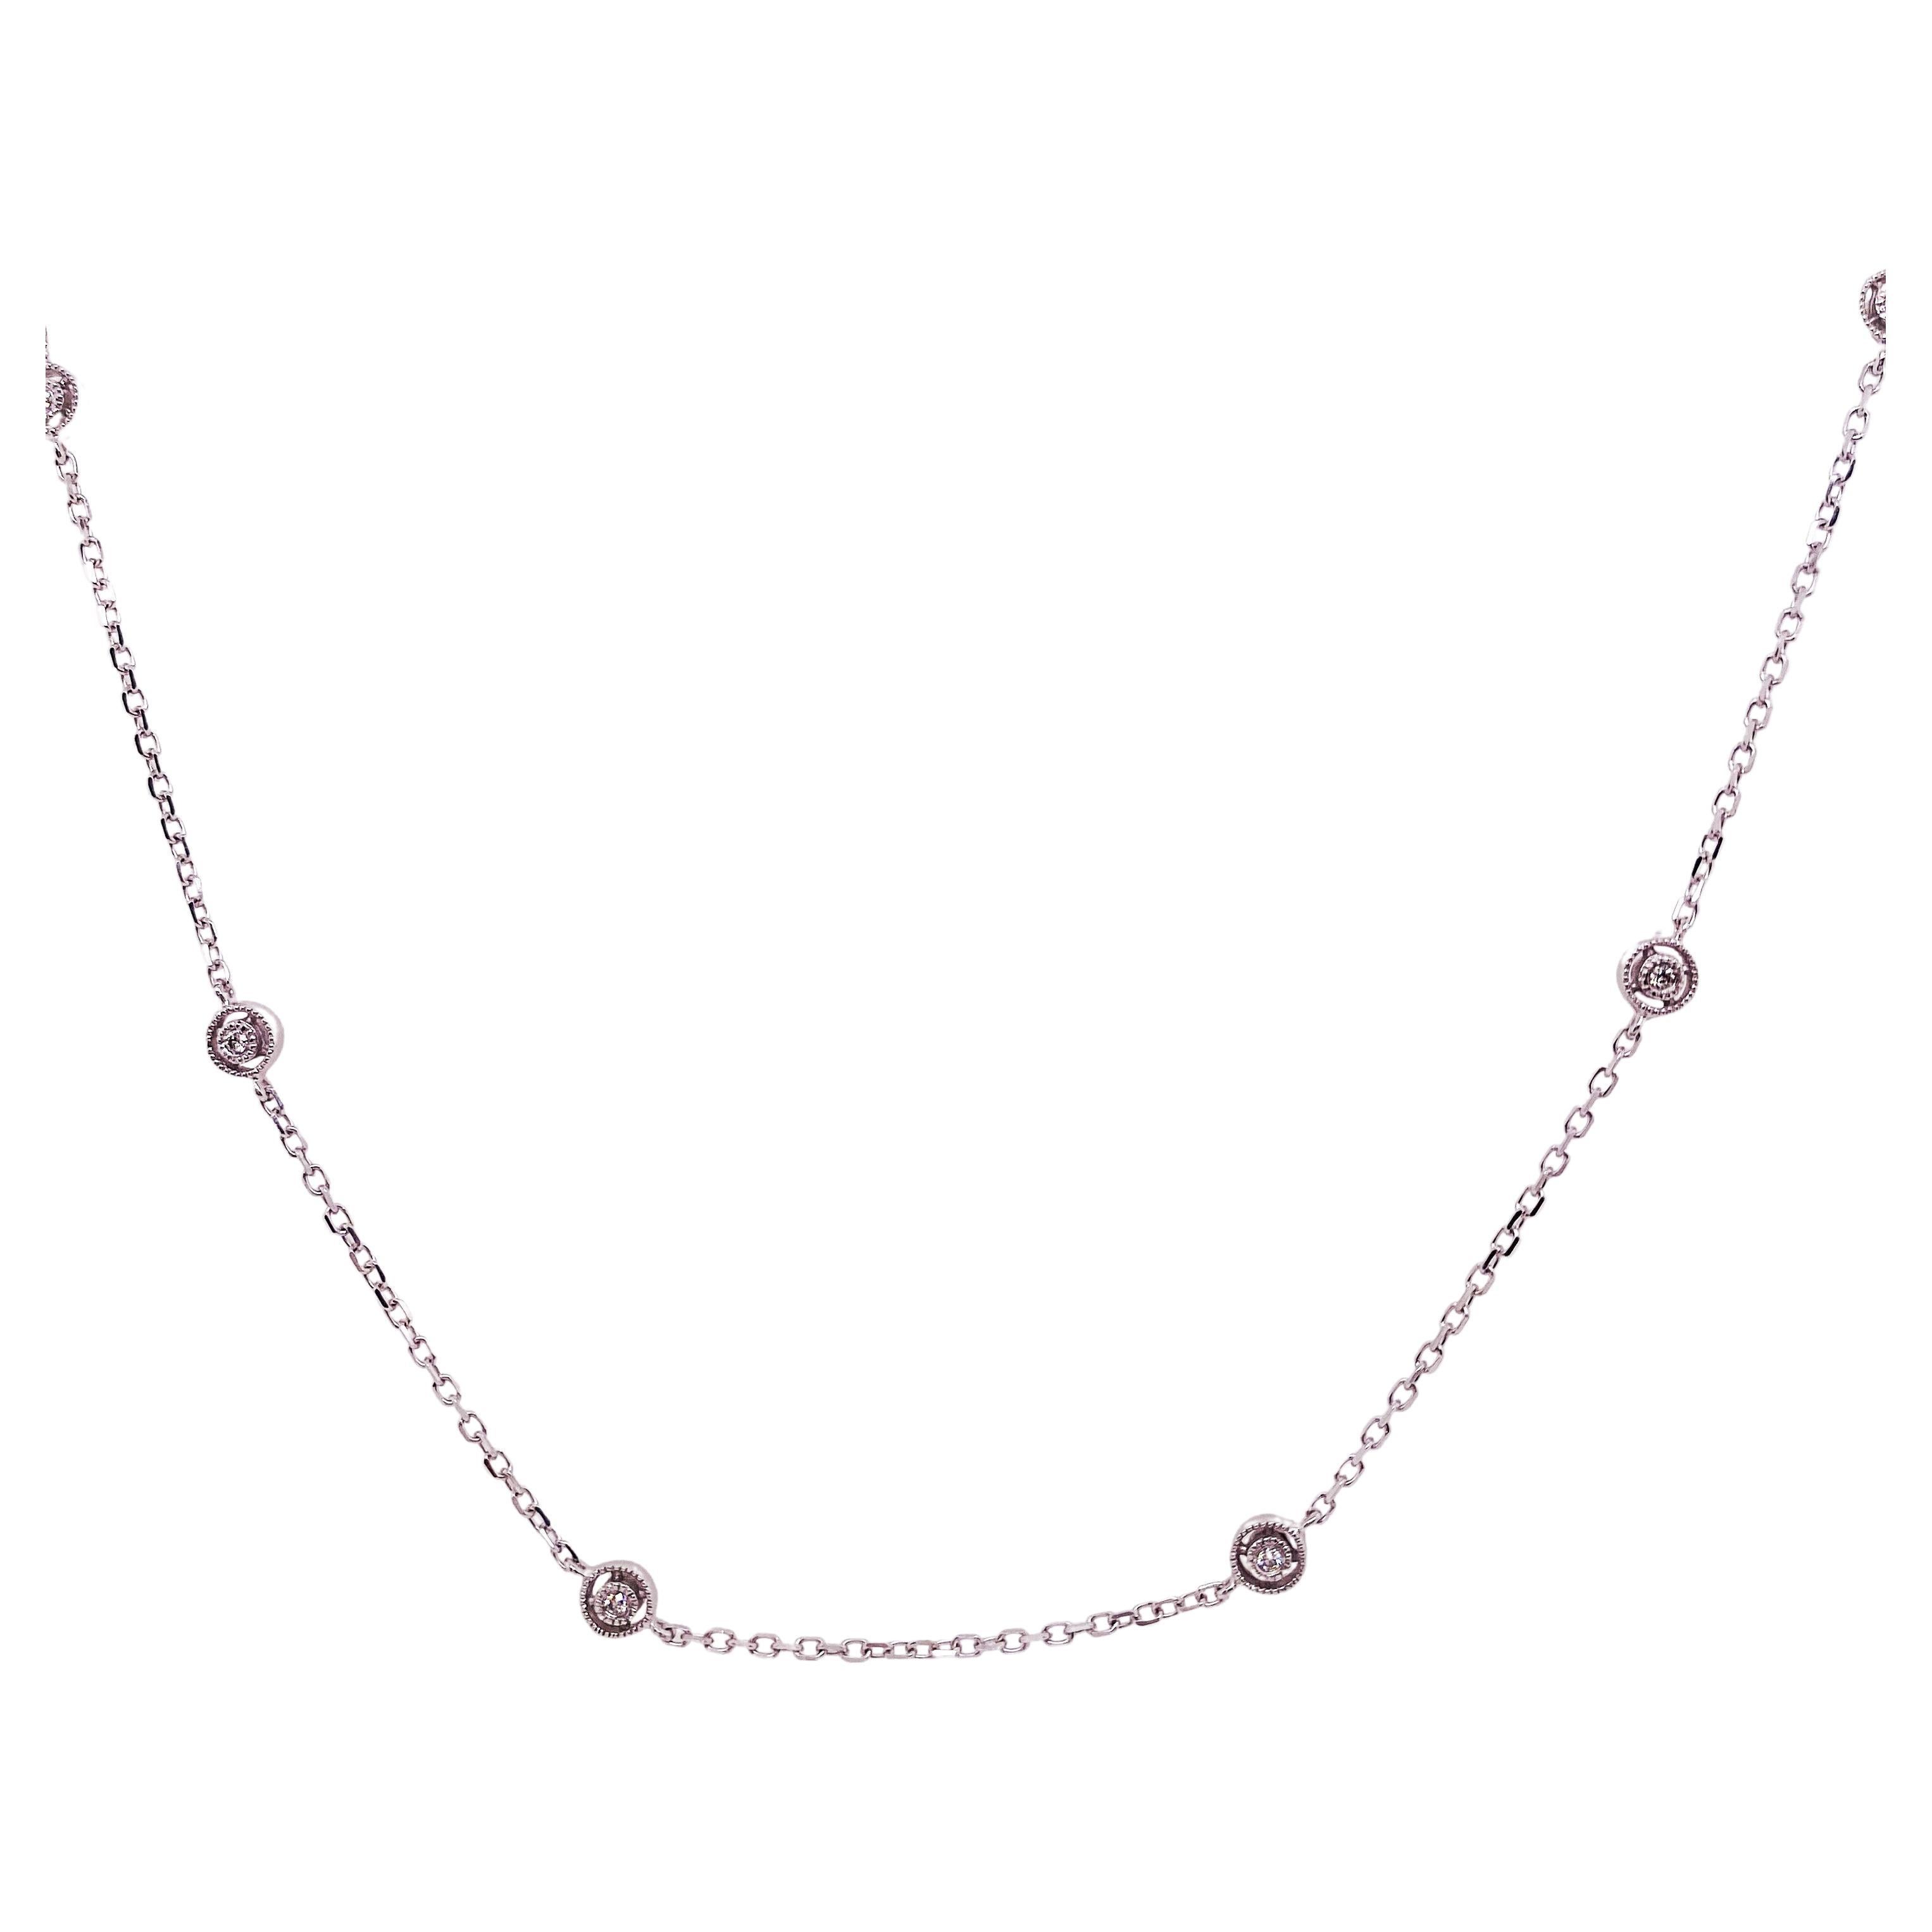 Diamonds by the Yard Necklace with Halo 14 Karat White Gold